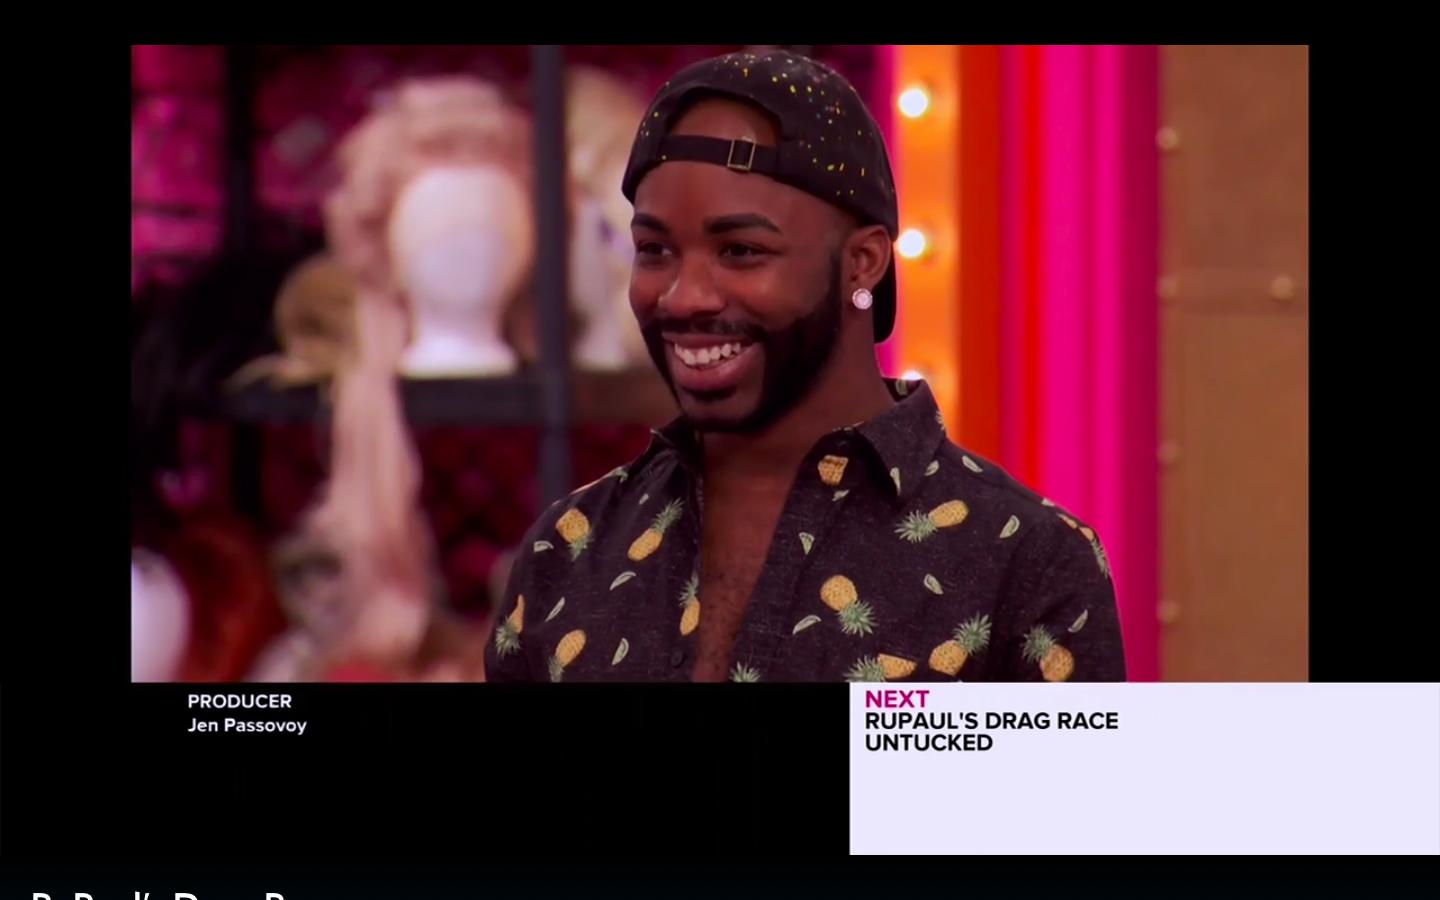 Honey Davenport Official on Twitter: "Guess who's back in 👠 #DragRace #TradeOfSeason11 https://t.co/YOQQ1lWvQf" / Twitter